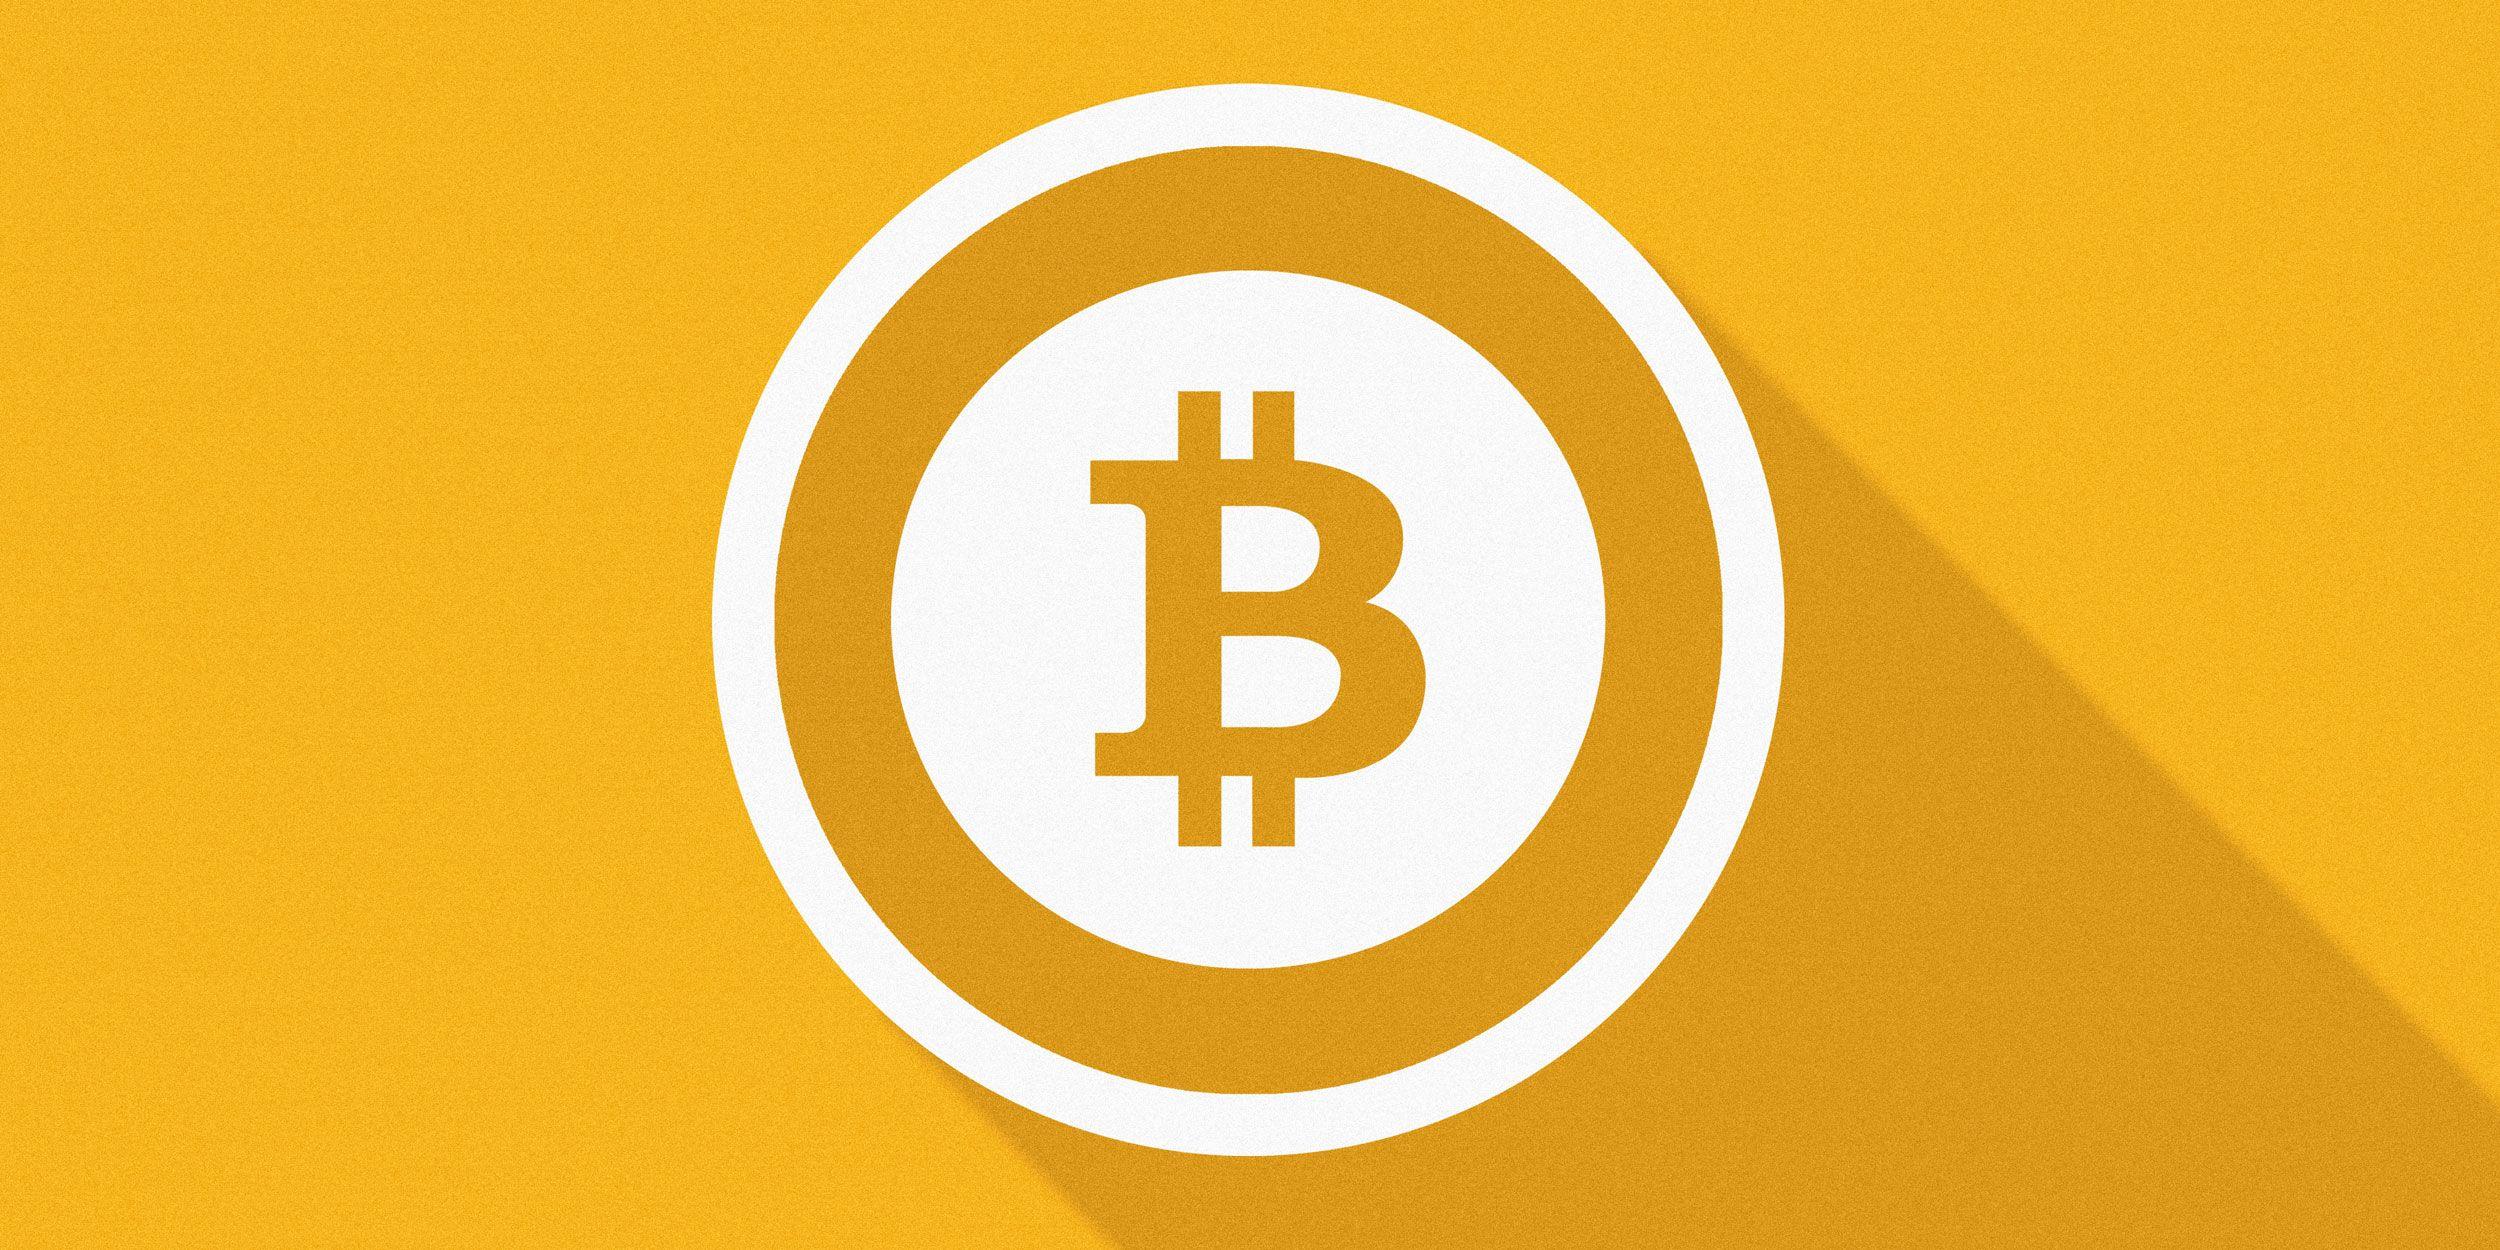 Bitcoin Mining Logo - How To Get Bitcoins: A Fairly Comprehensive Yet, To The Point